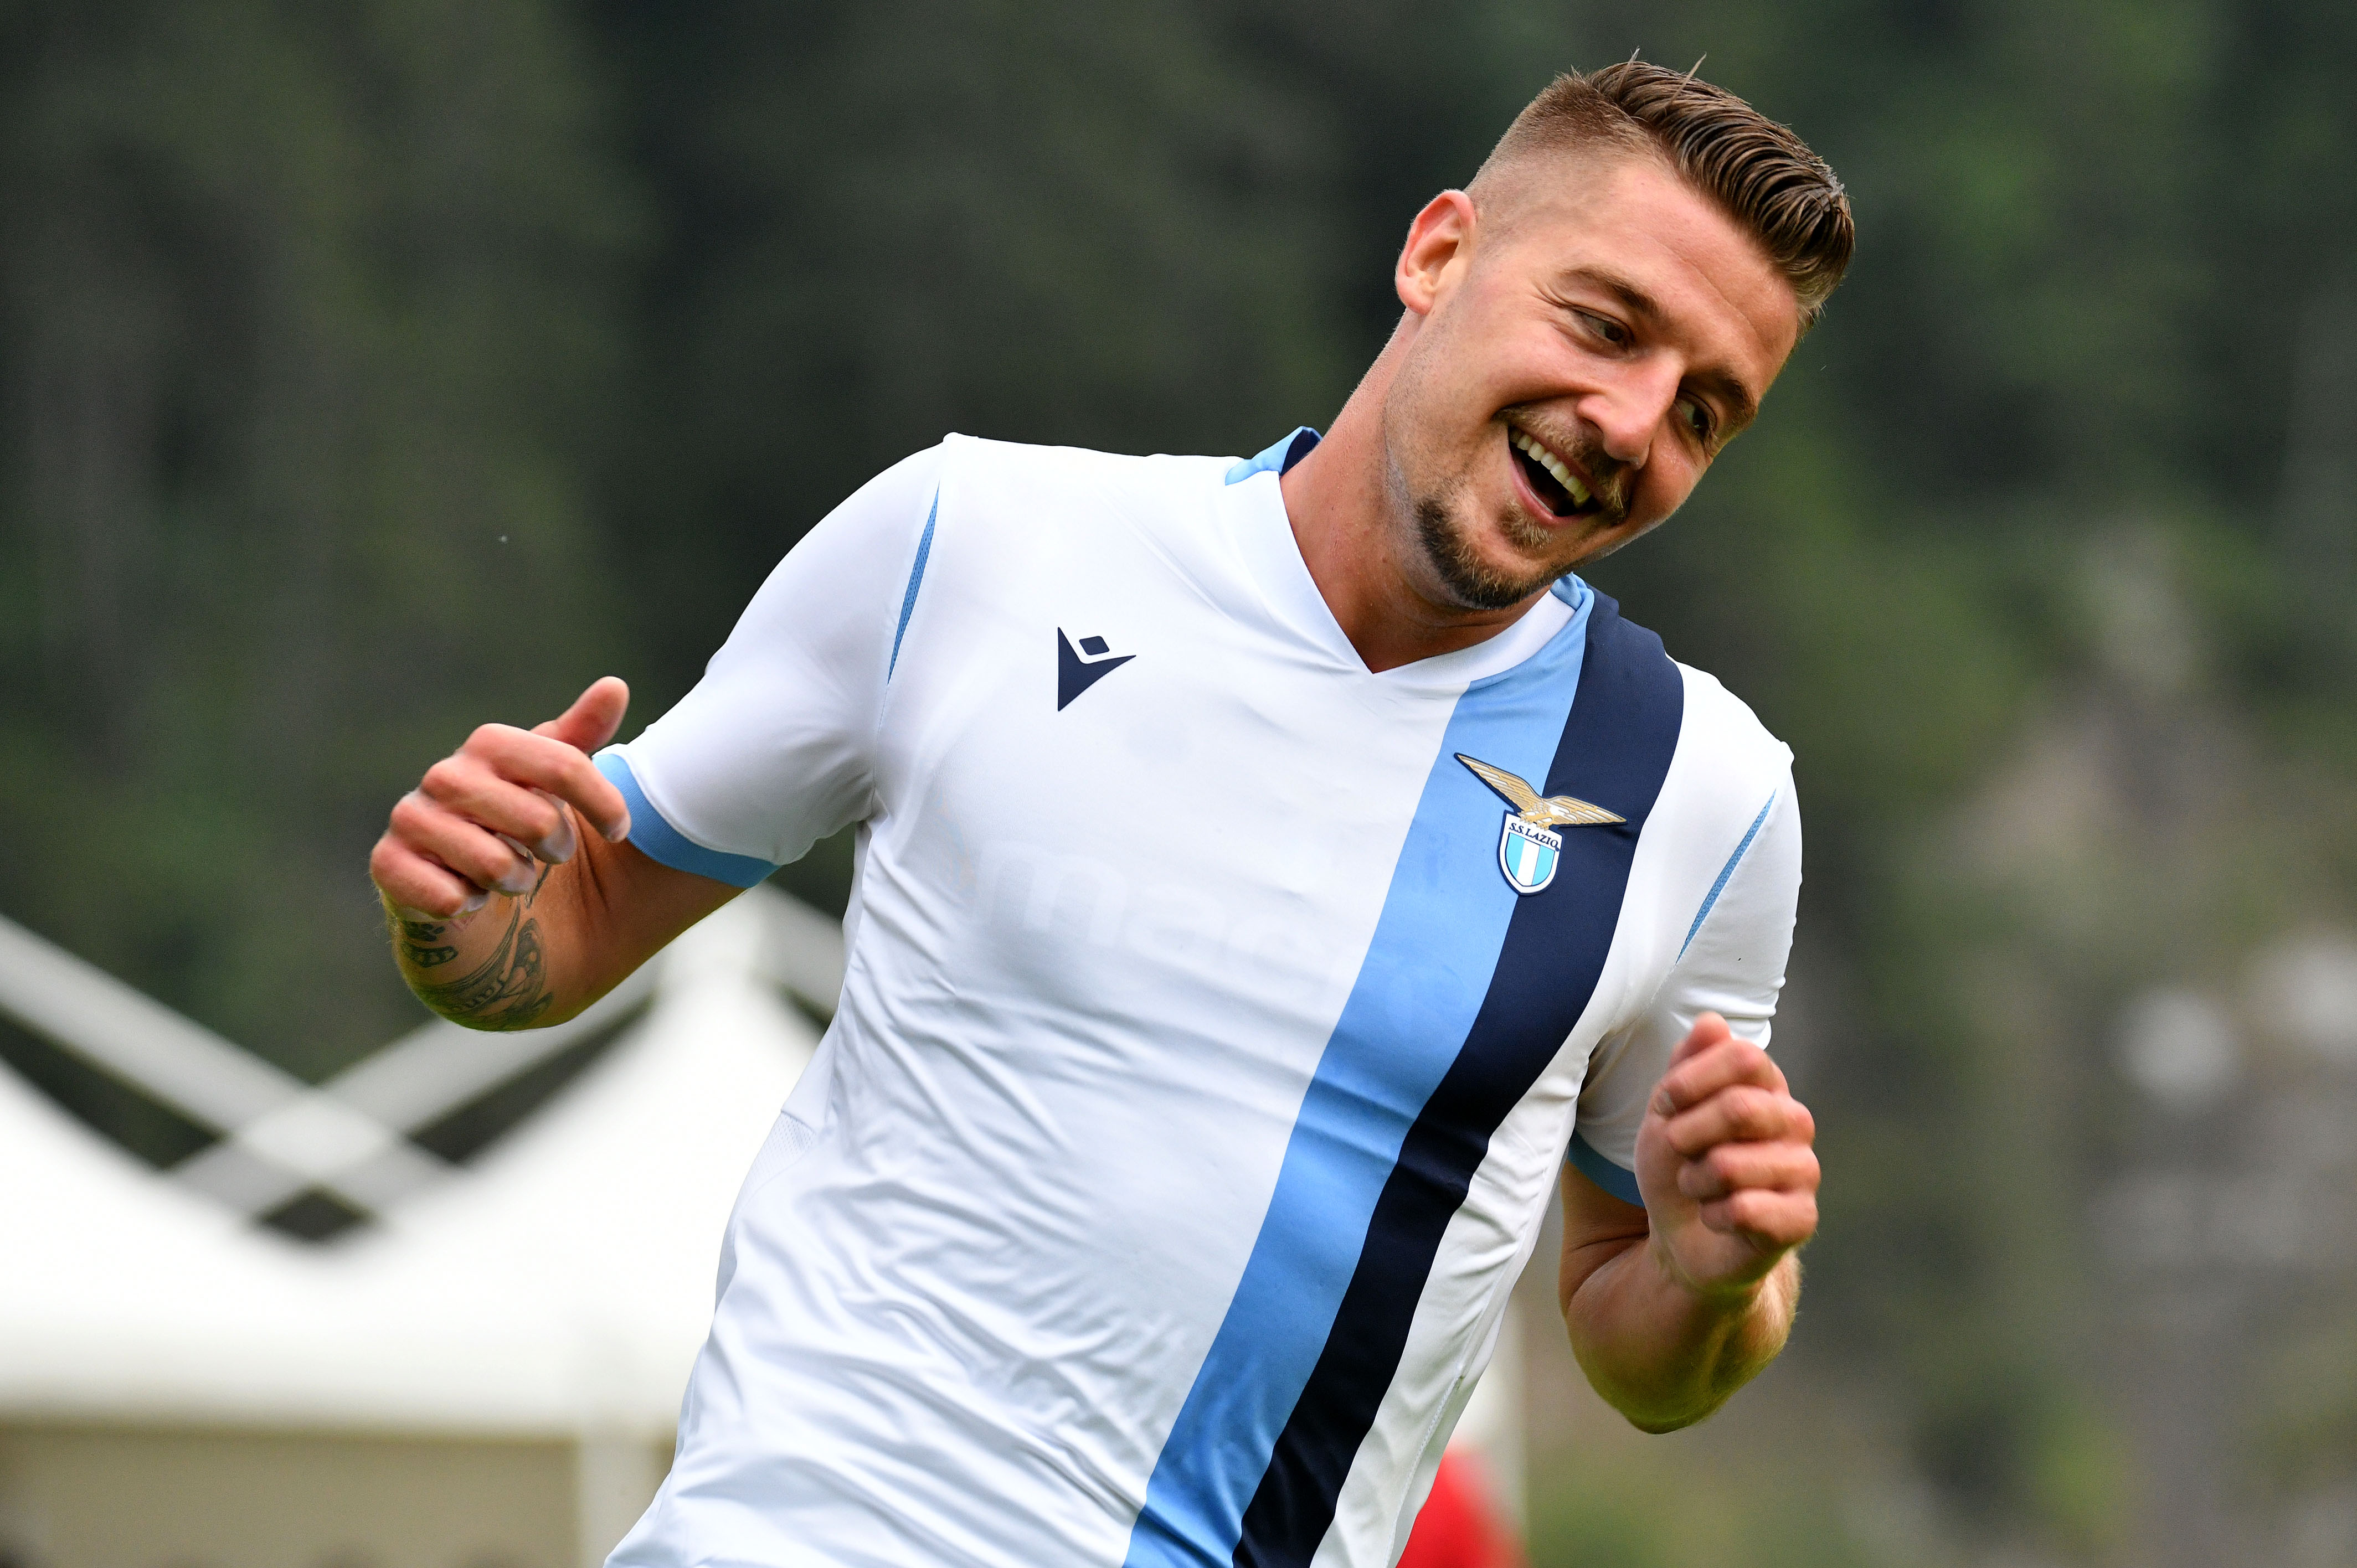 Milinkovic-Savic could spark a transfer war in the summer. (Photo by Marco Rosi/Getty Images)